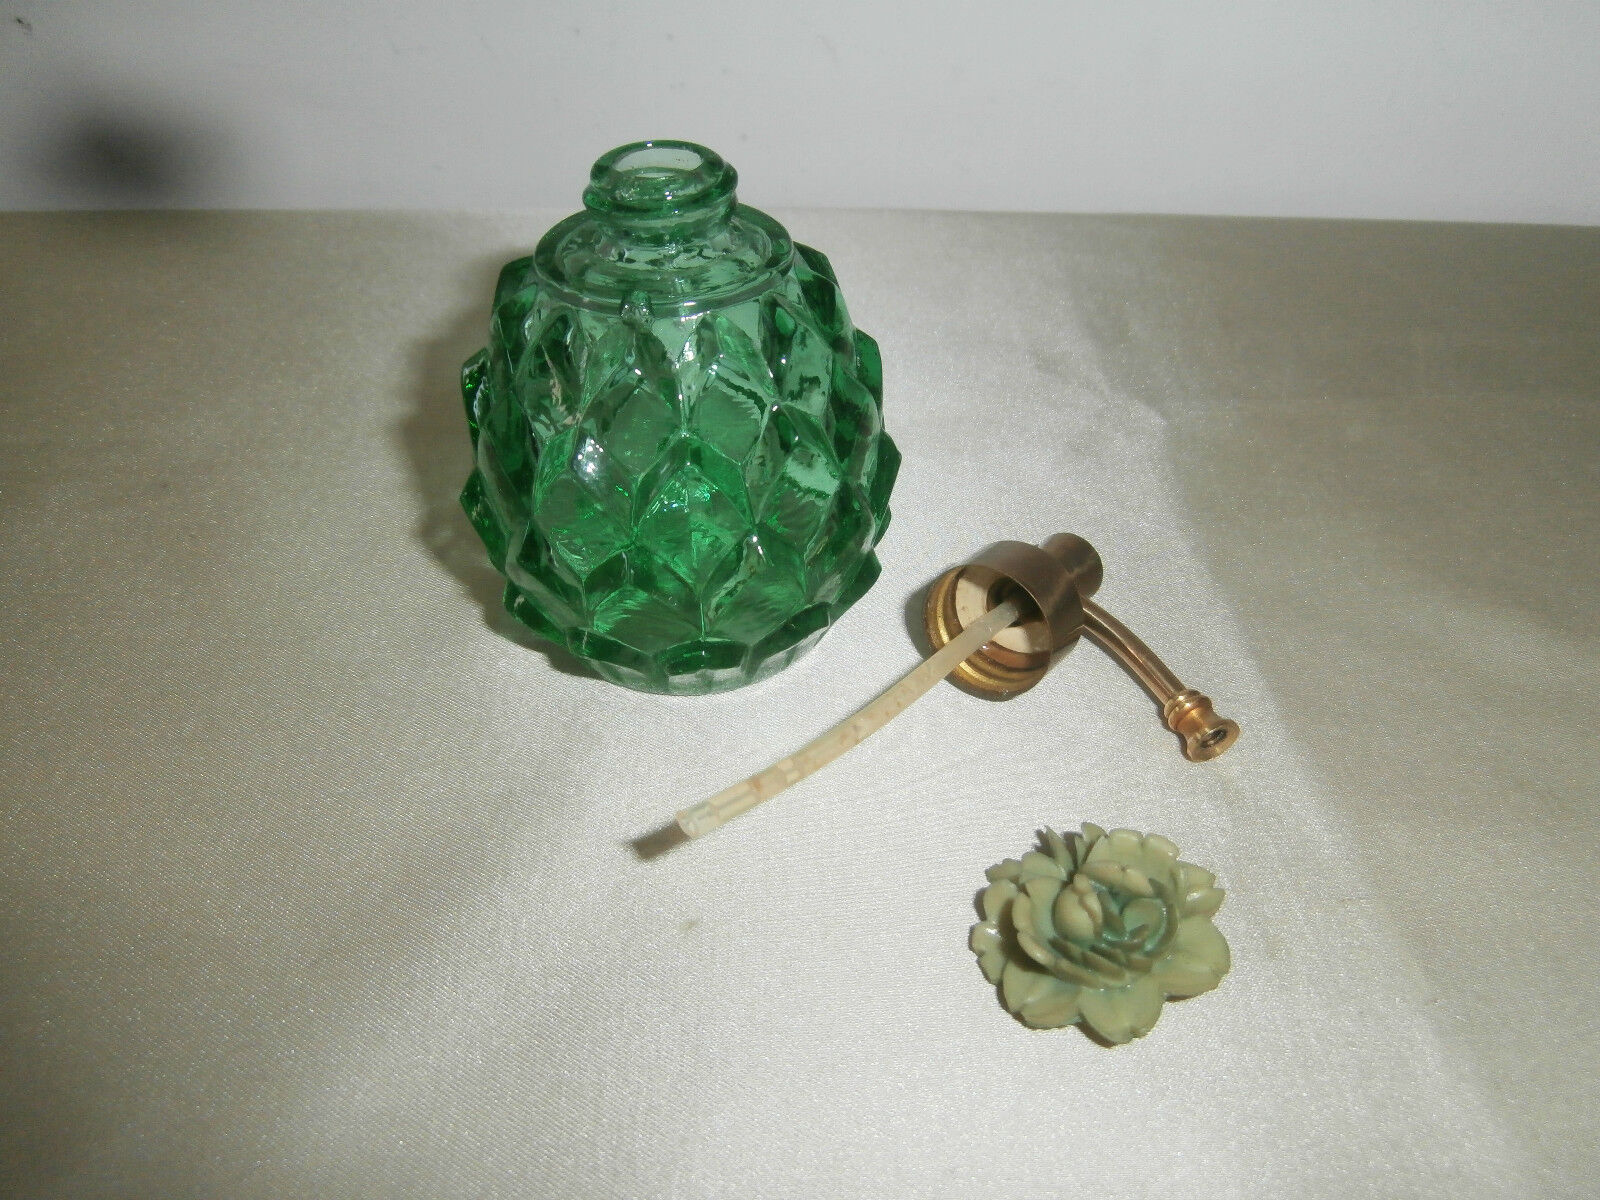 Vintage I. W. Rice Made in Japan Emerald Green Pineapple Perfum bottle